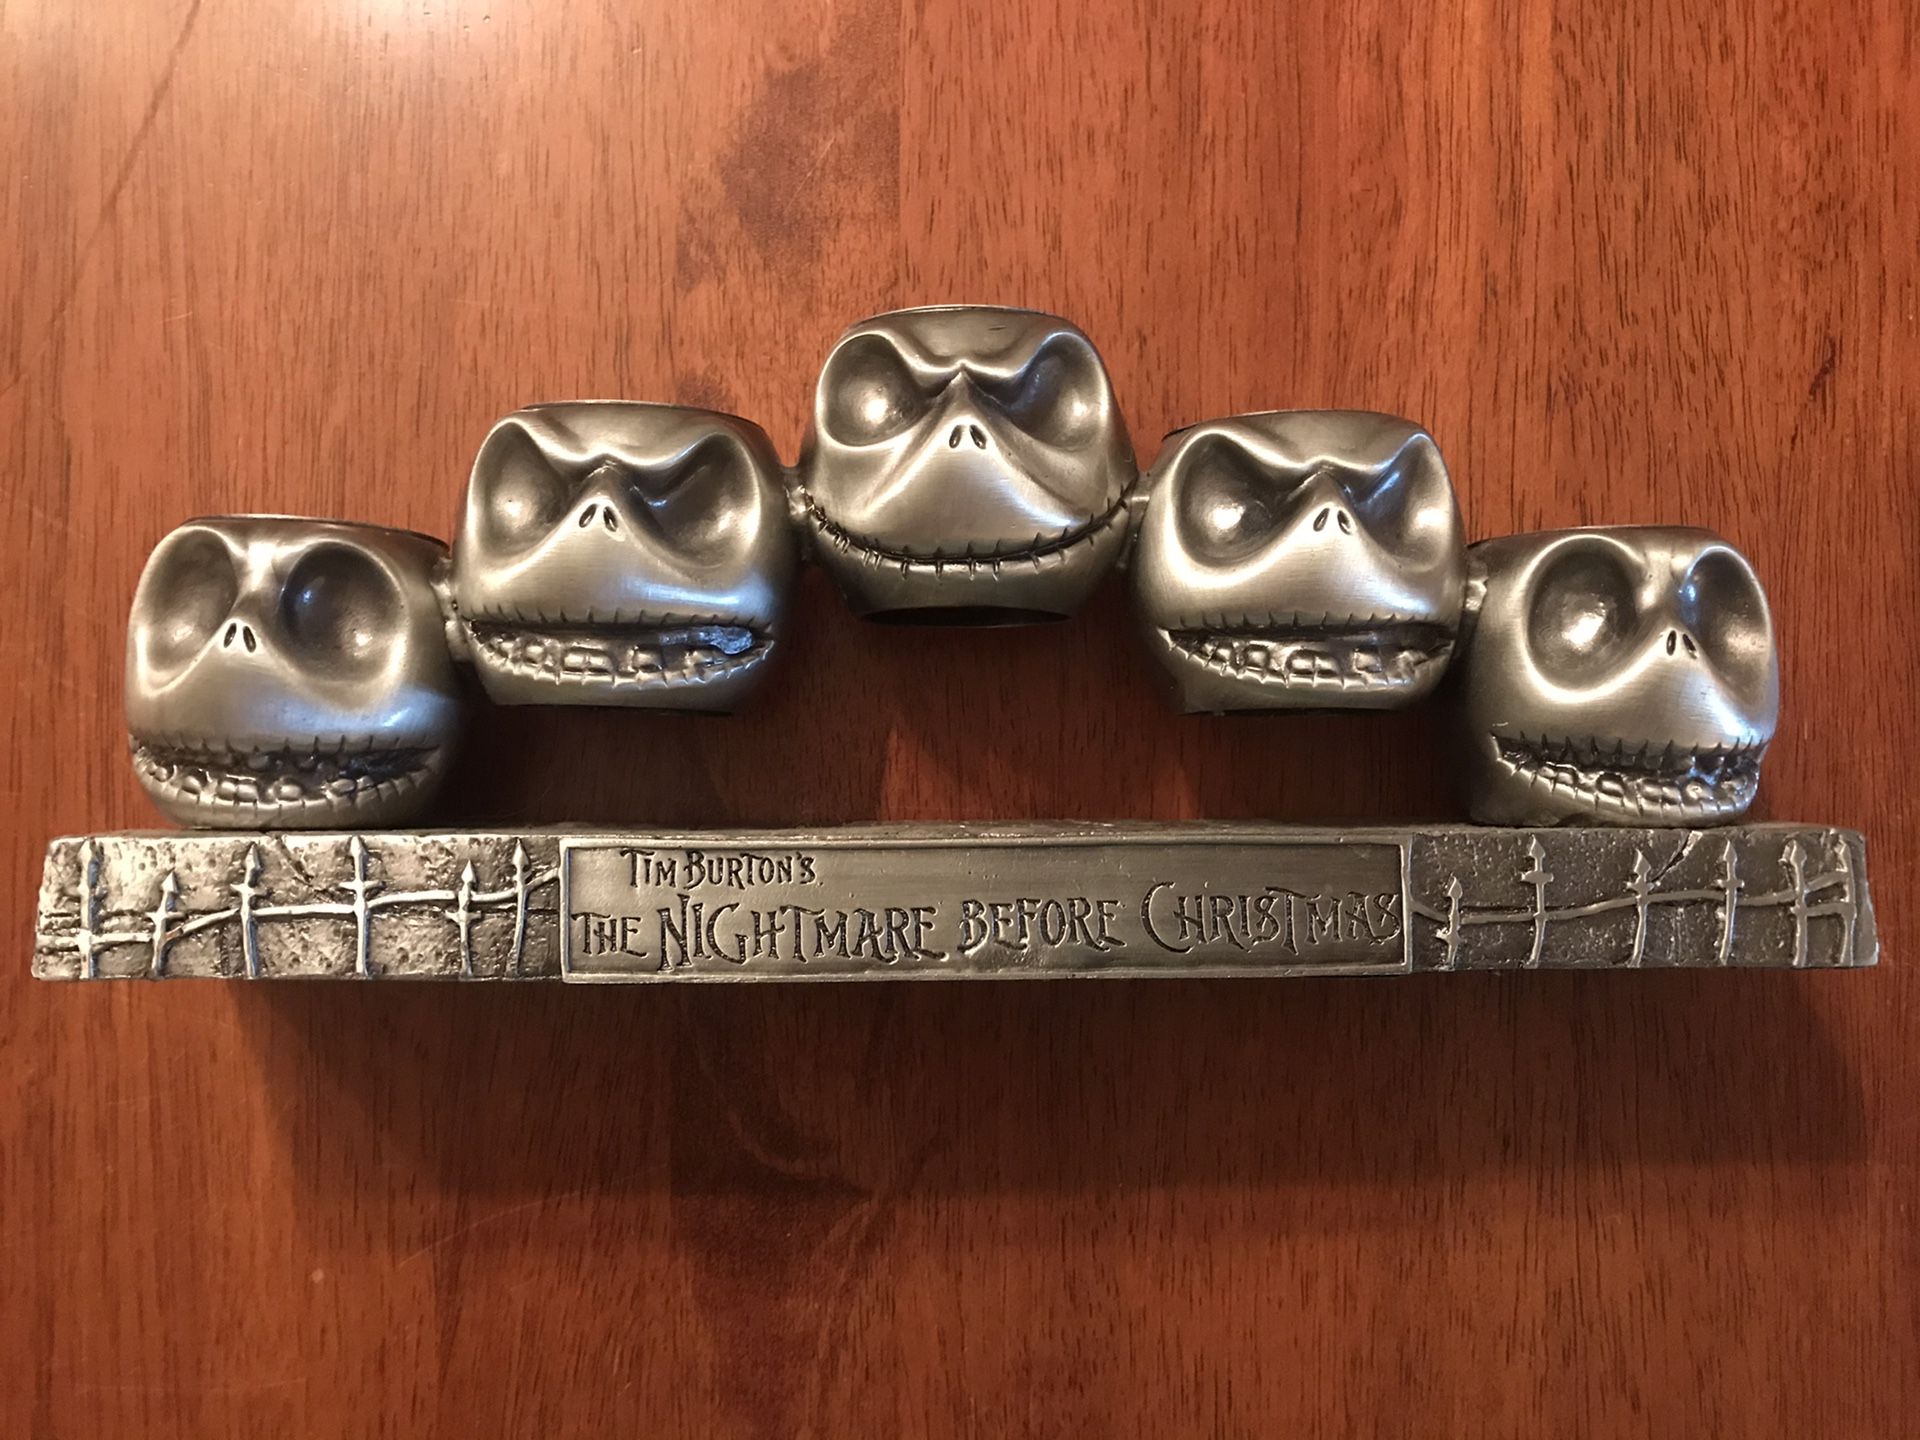 The Nightmare Before Christmas- Pewter Candle Holder